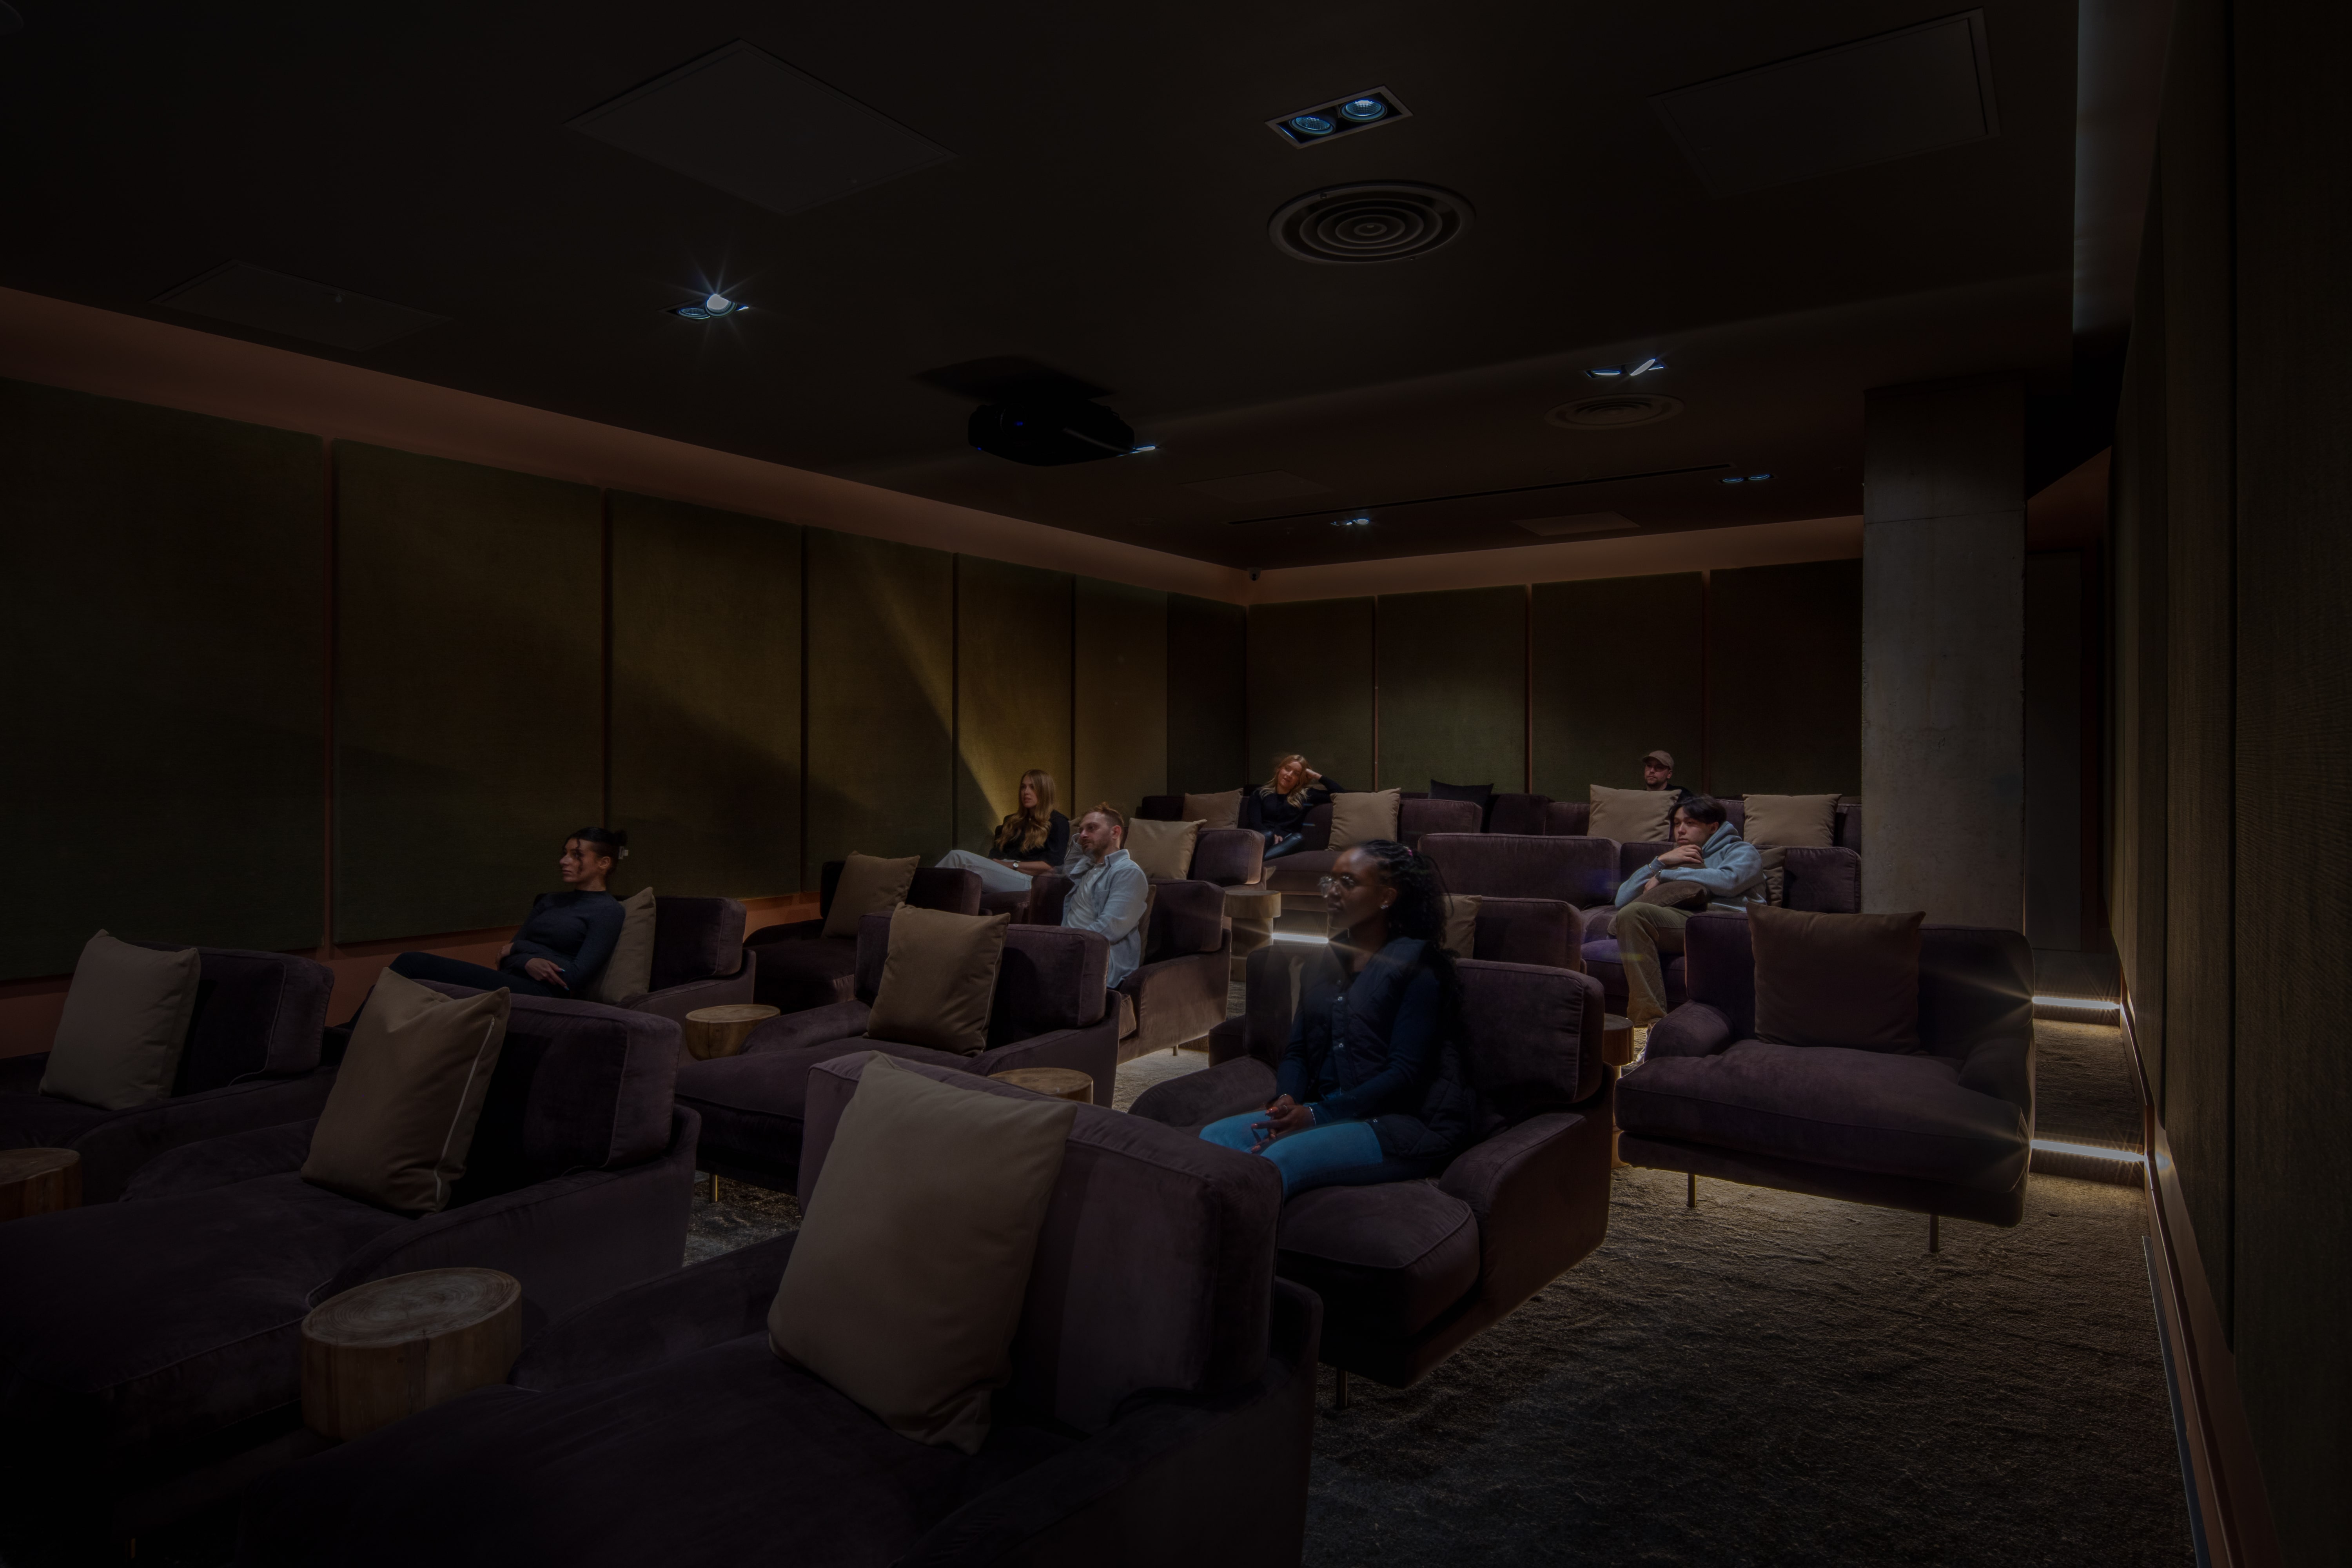 Sit back and be entertained in the screening room